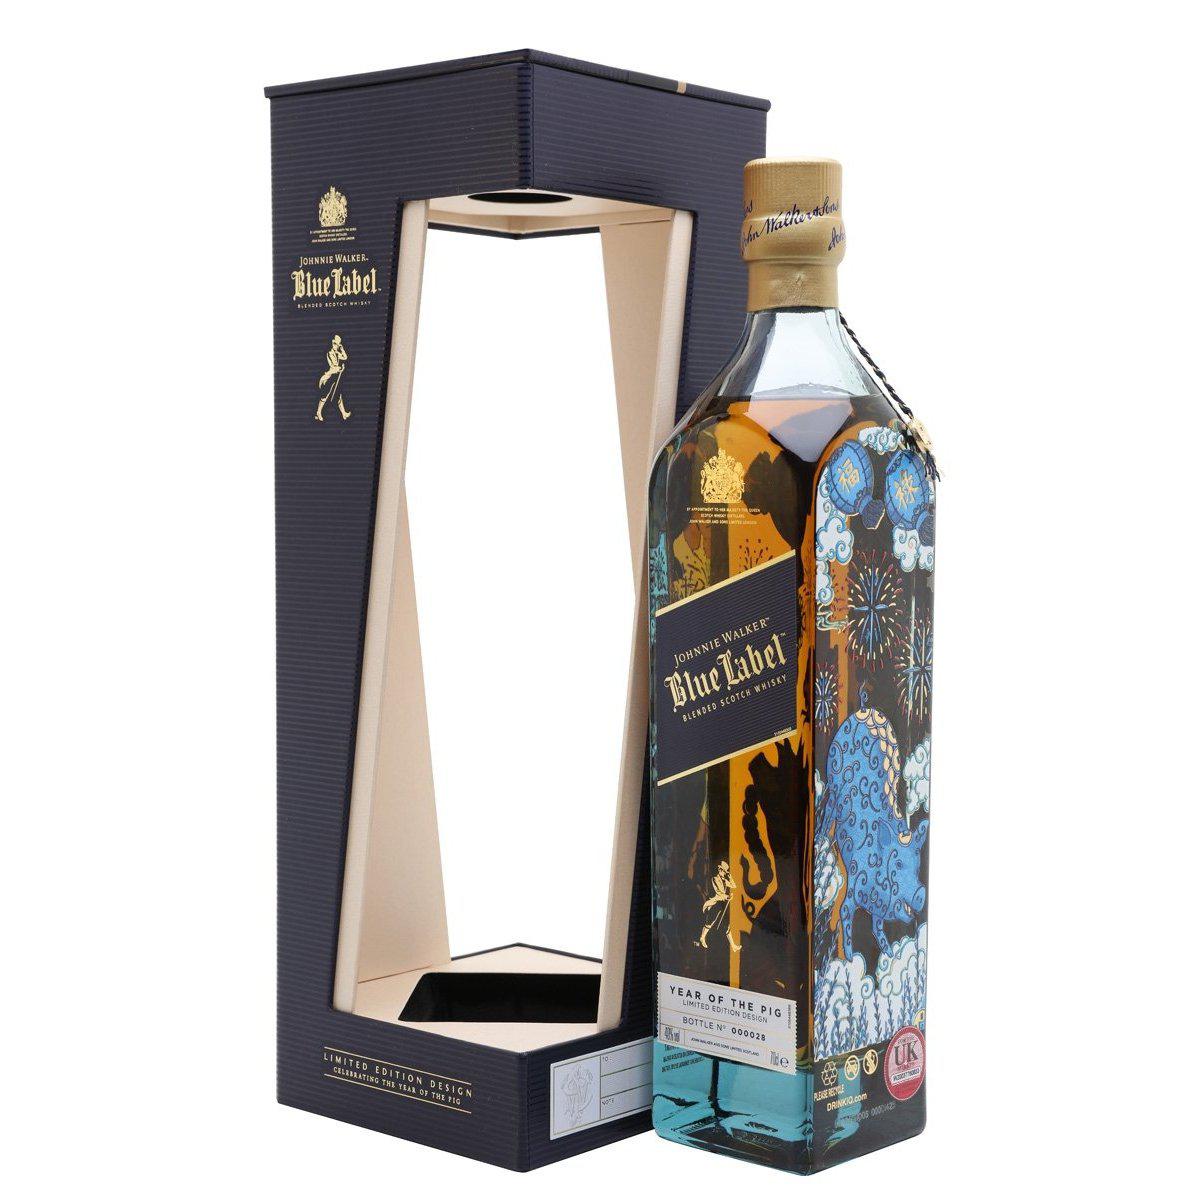 Johnnie Walker Blue Year of the Pig Limited Edition - Paul’s Liquor